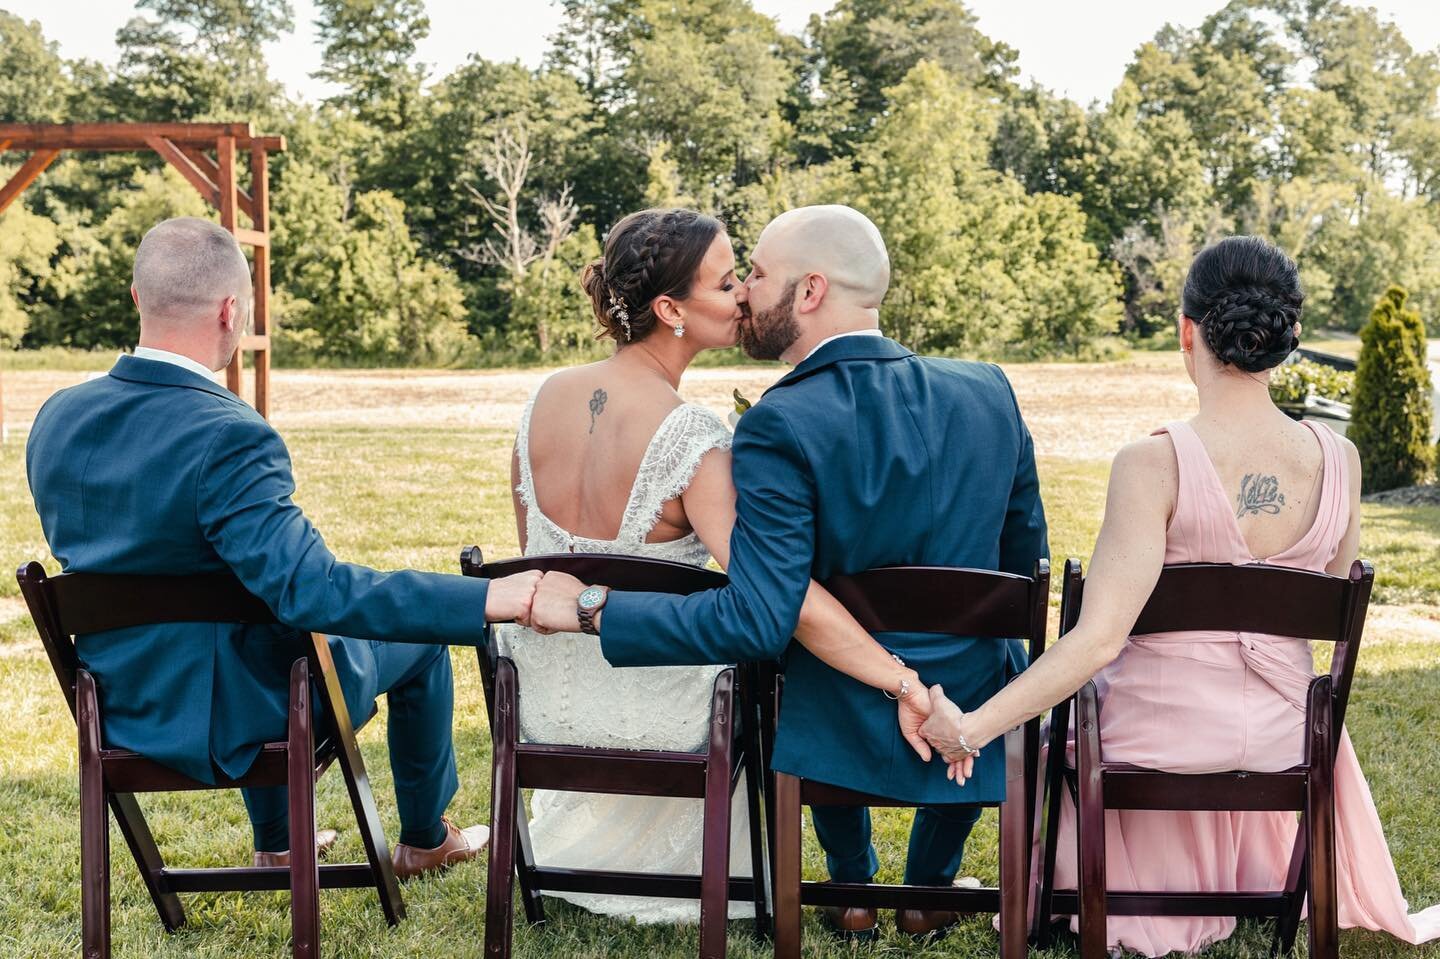 The most requested photo I&rsquo;ve had for my 2021 weddings is this pose right here! 
One of the things that makes your wedding day so special is the people you share it with. Your closest family members and your best friendships. It&rsquo;s importa